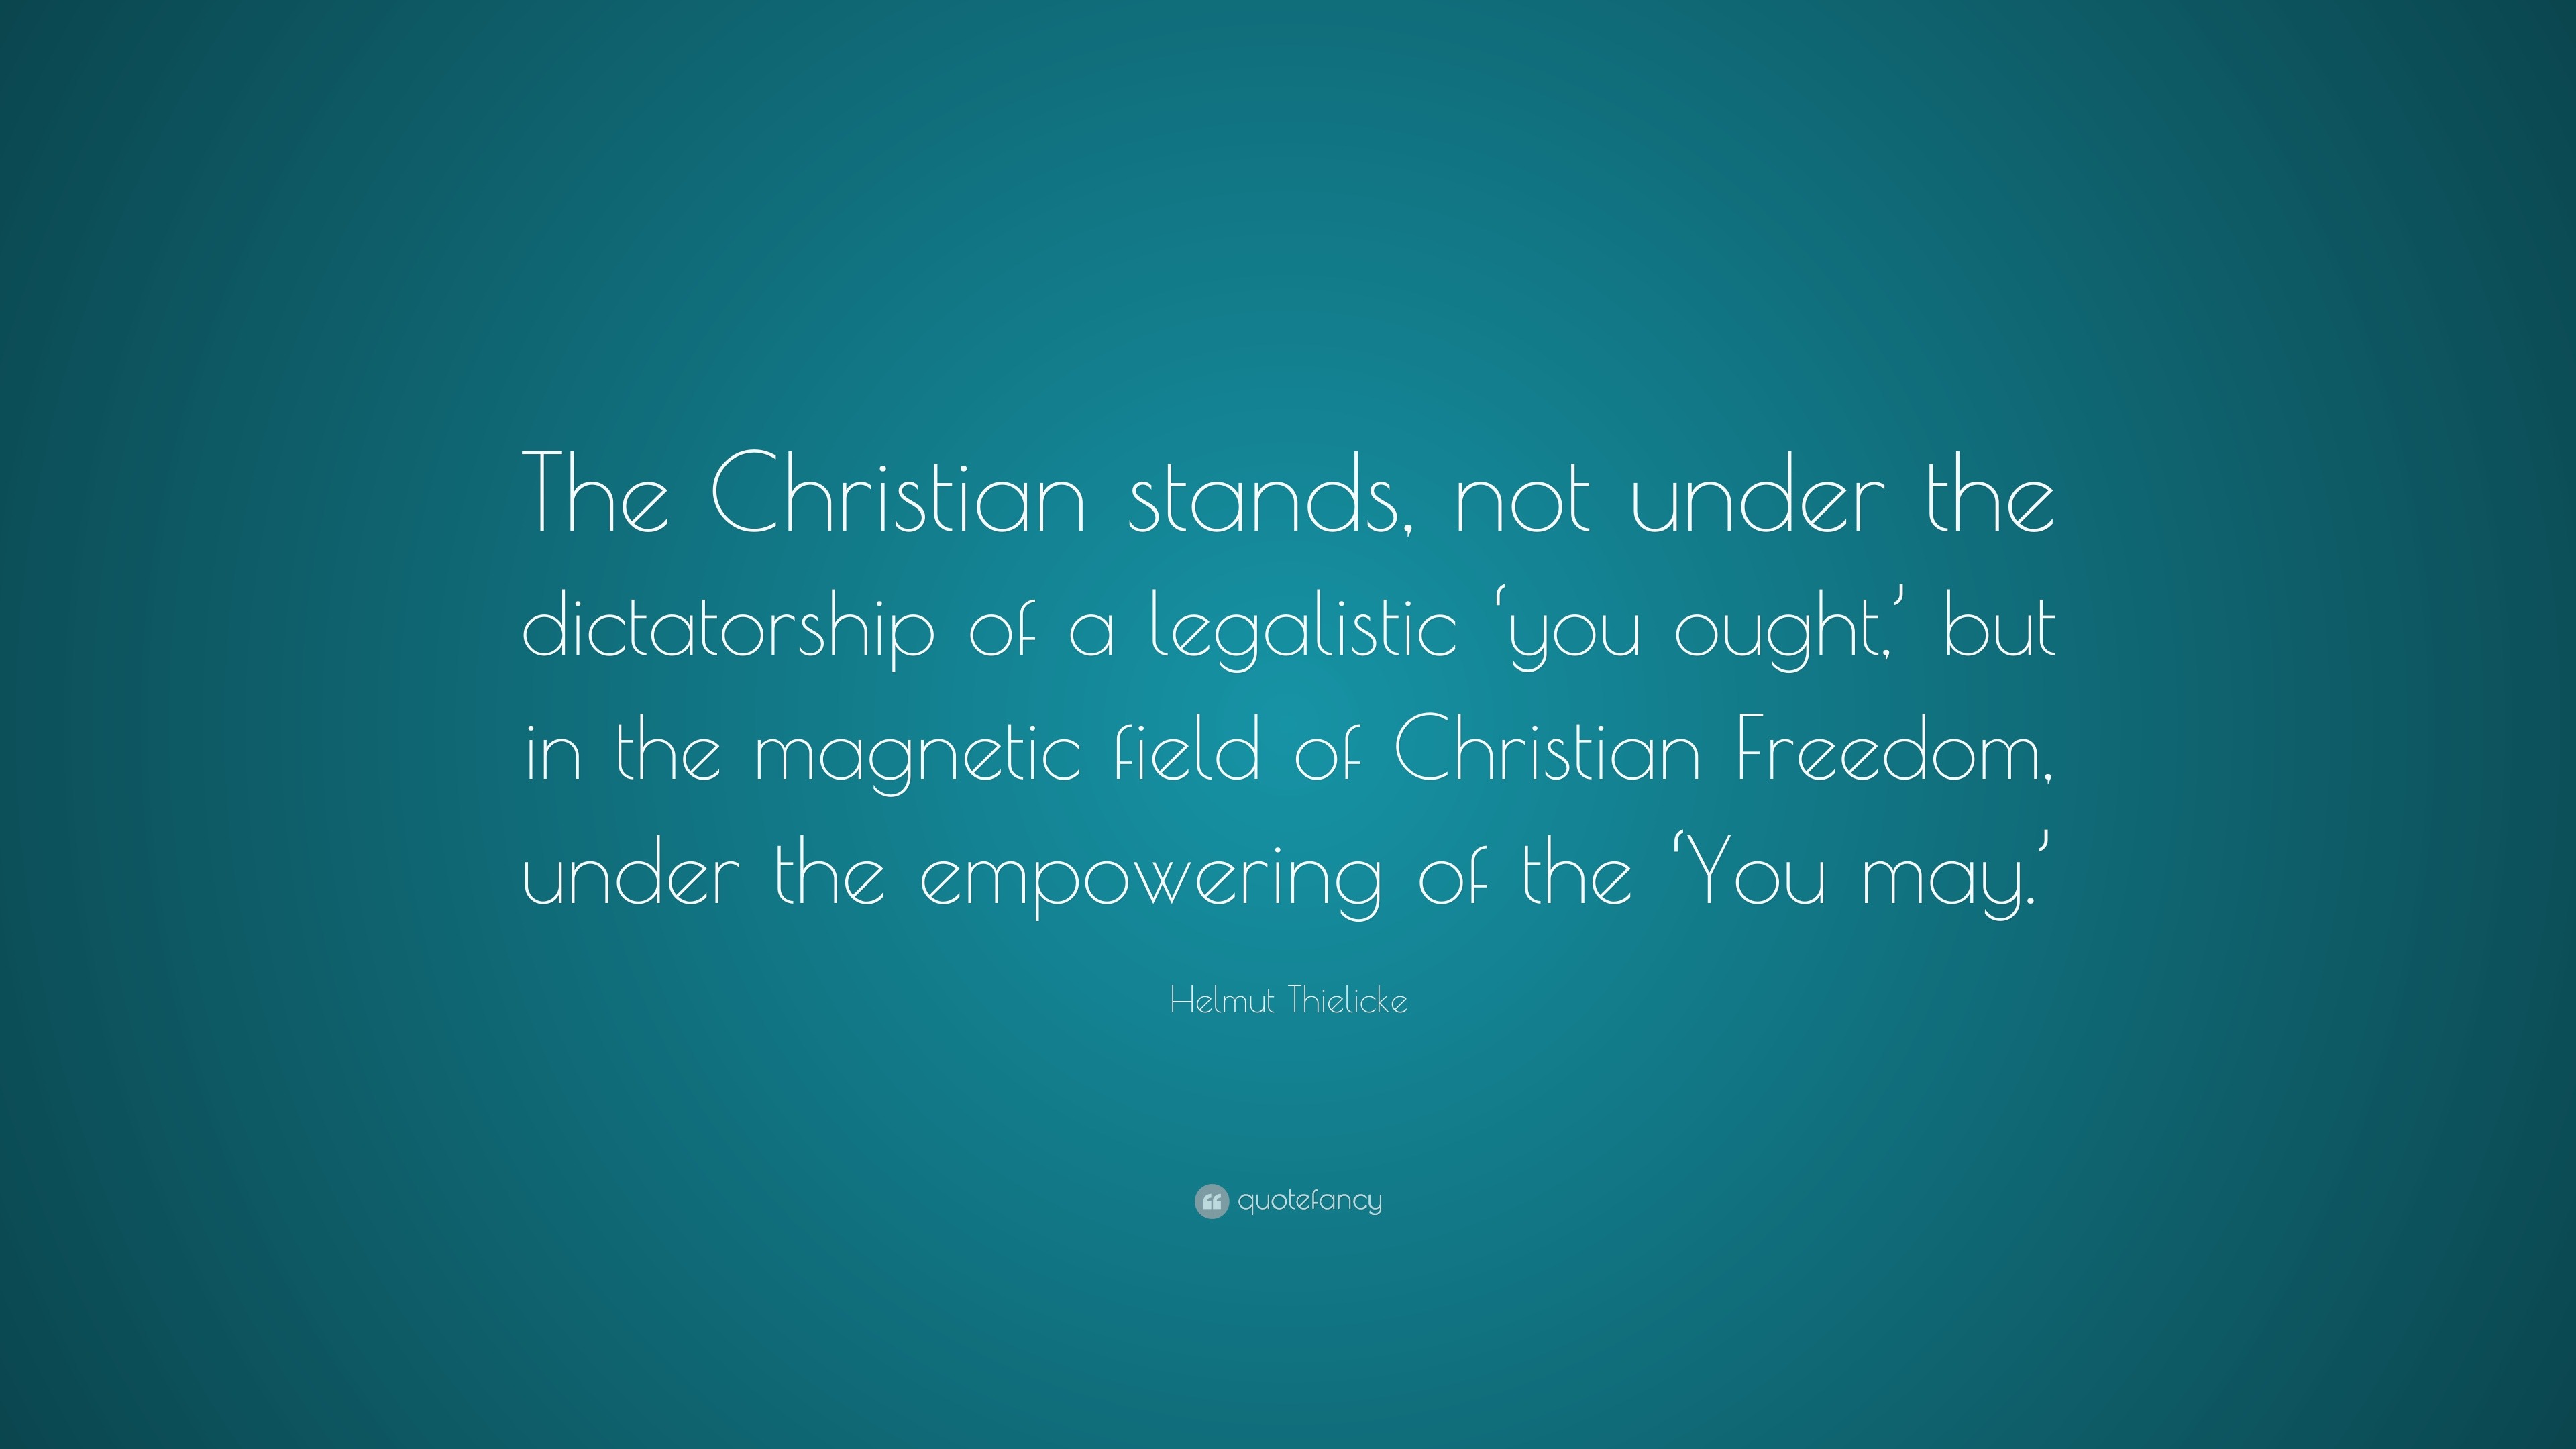 Helmut Thielicke Quote: “The Christian stands, not under the dictatorship  of a legalistic &#39;you ought,&#39; but in the magnetic field of Christian Fre...”